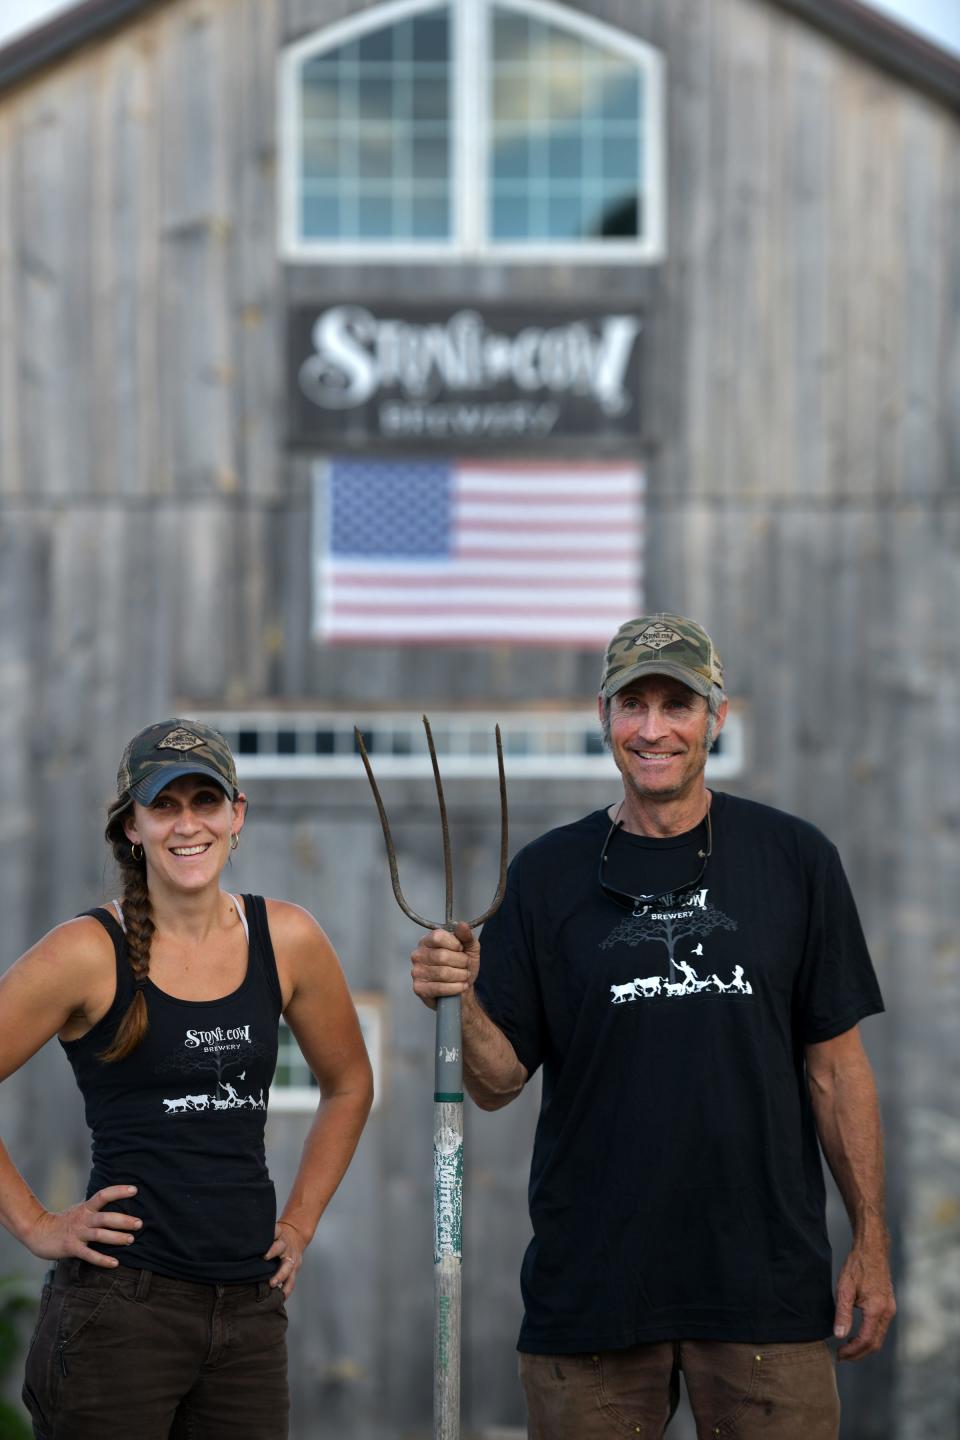 In a reprisal of the famous painting American Gothic, Molly Stevens Dubois and her father Phil Stevens put their own spin on the American classic at Stone Cow Brewery Tuesday, June 15, 2021.